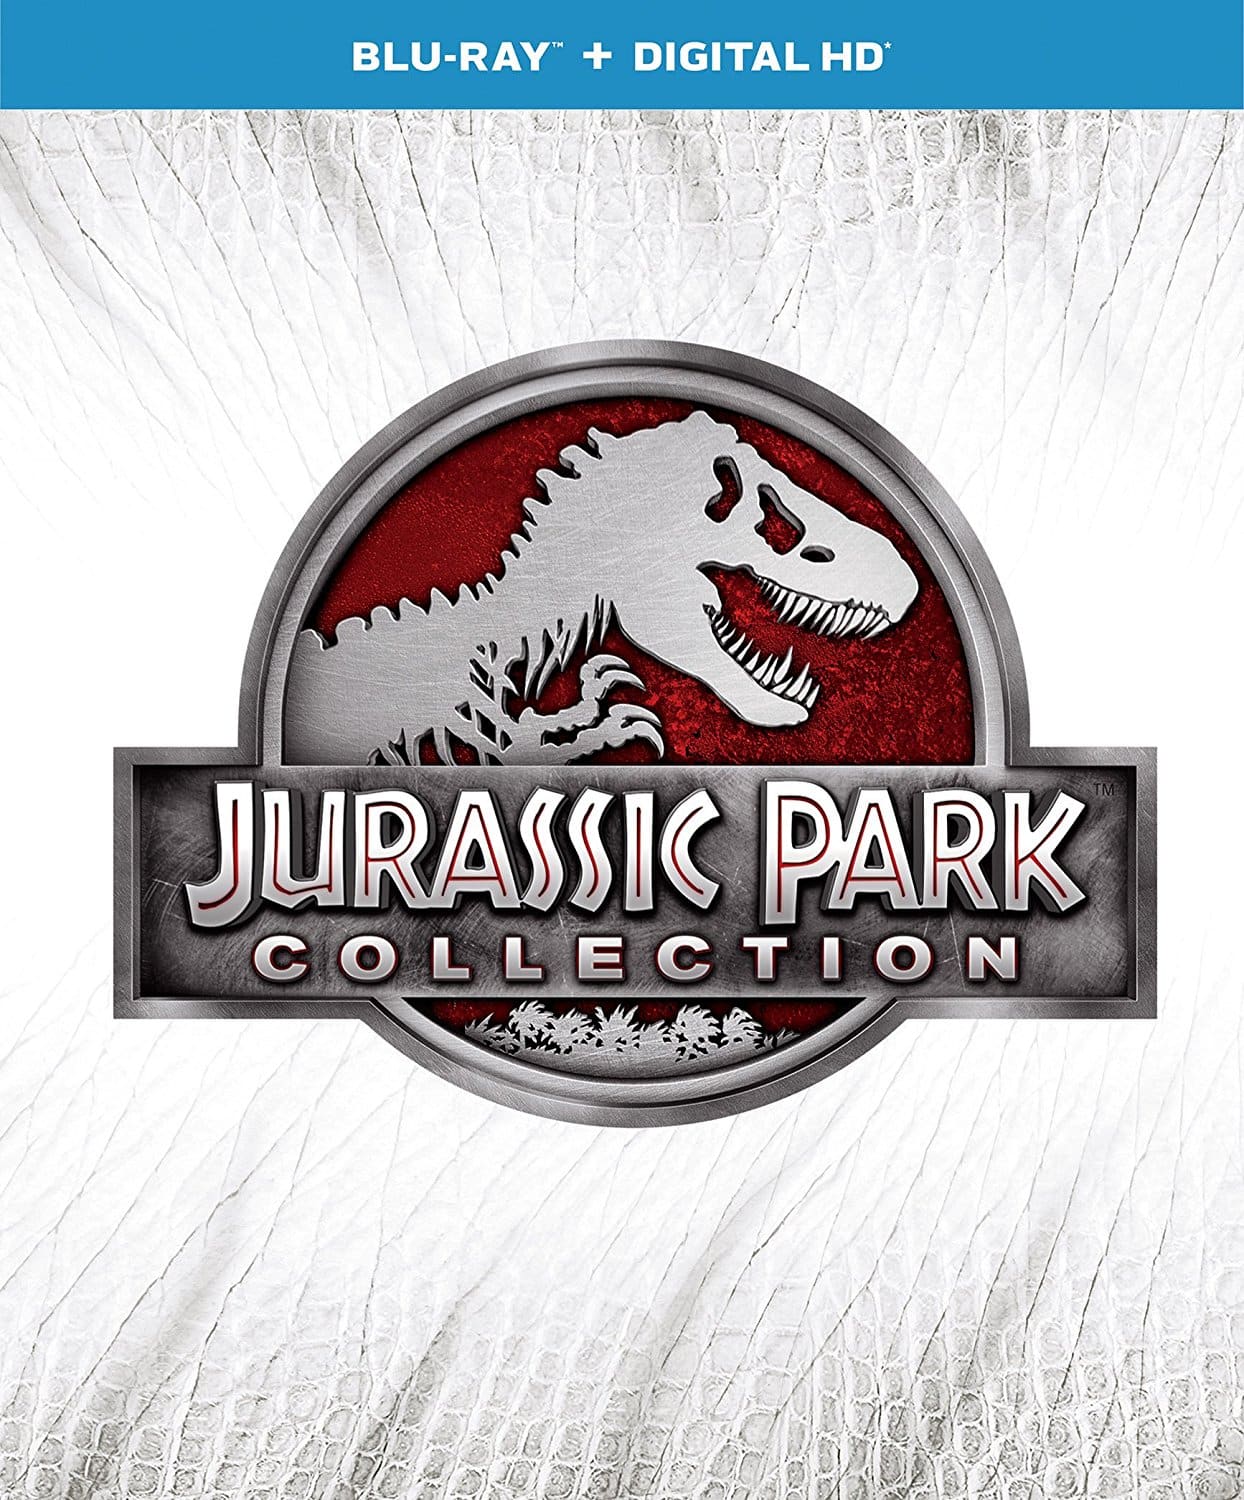 DEAL ALERT: Jurassic Park Blu-Ray Collection – 56% off